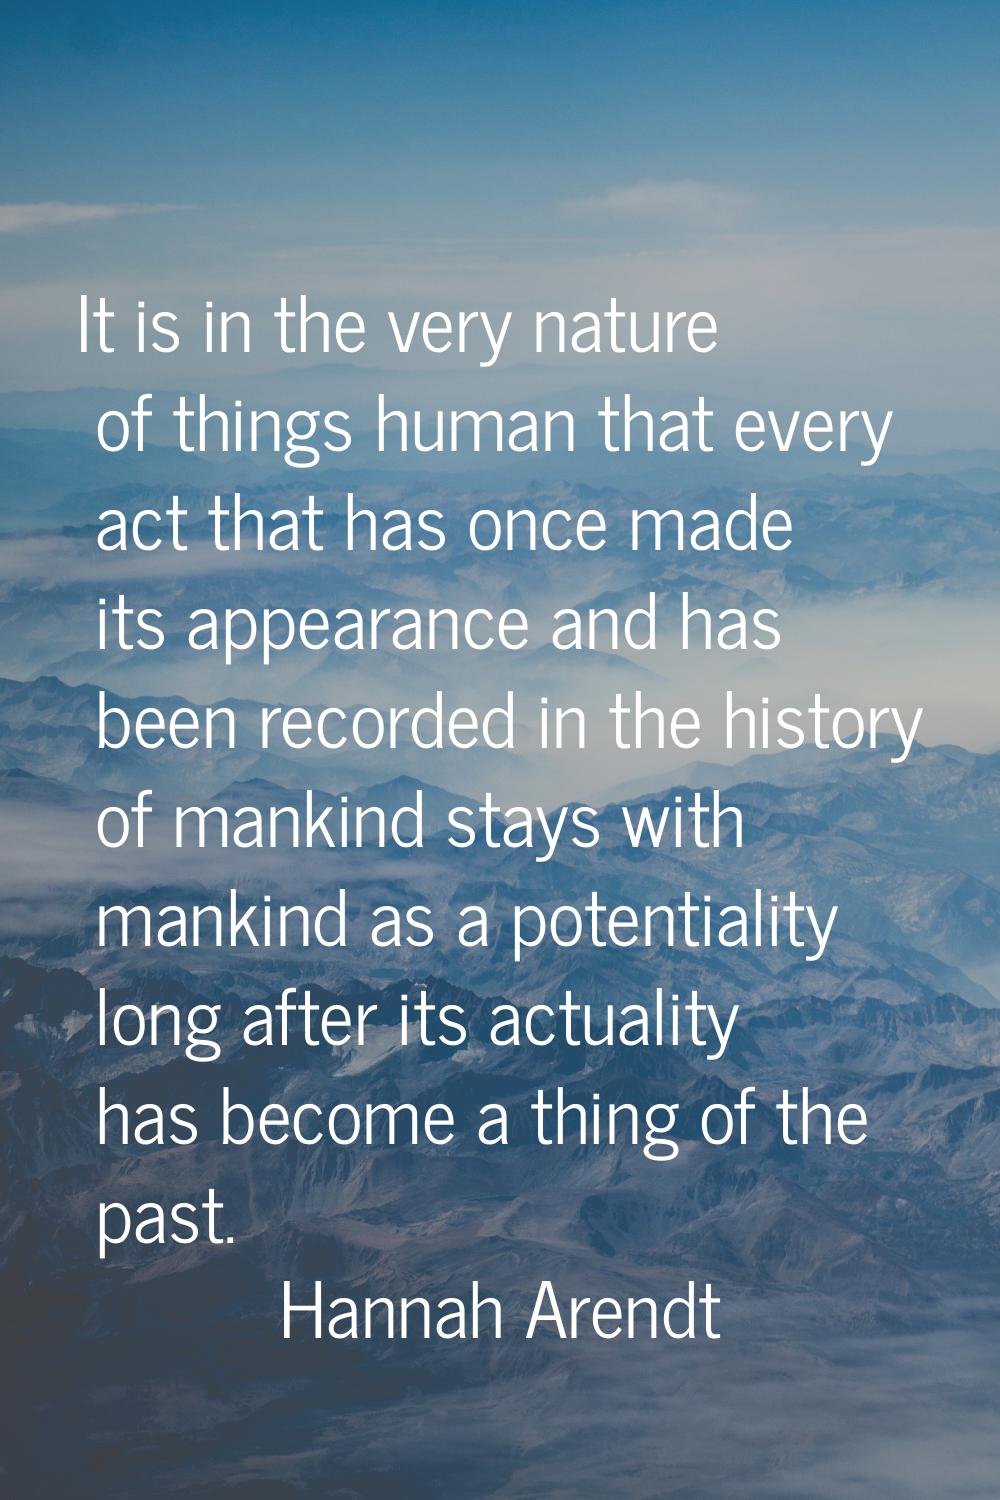 It is in the very nature of things human that every act that has once made its appearance and has b